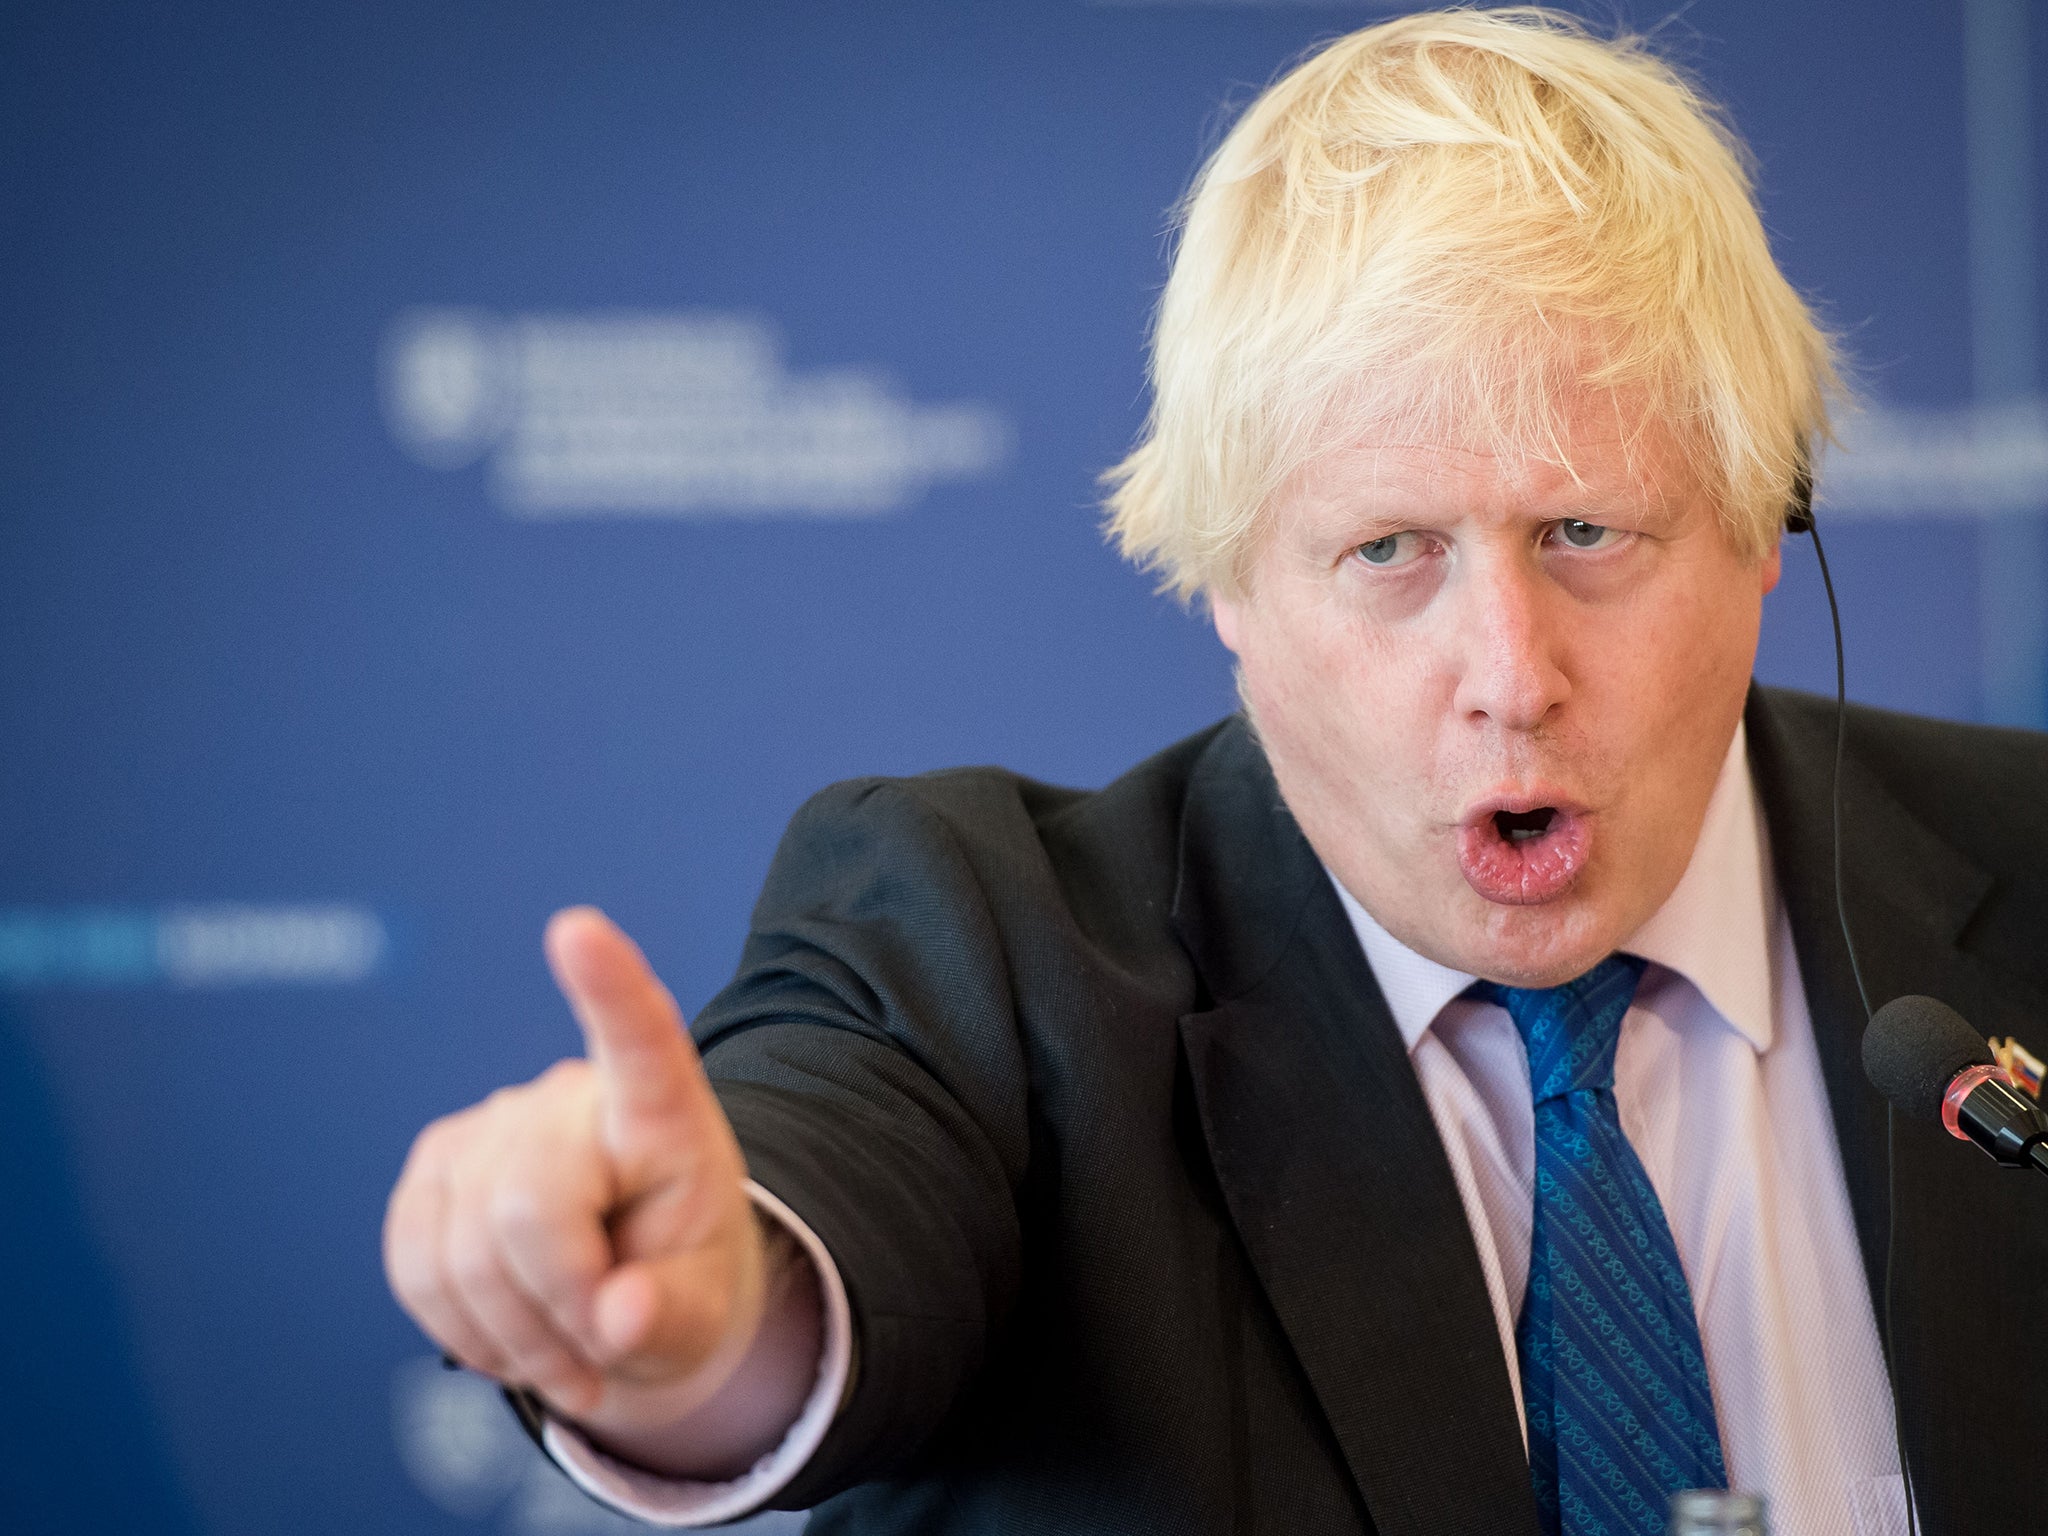 Boris Johnson has yet again penned an article criticising Theresa May and Brexit